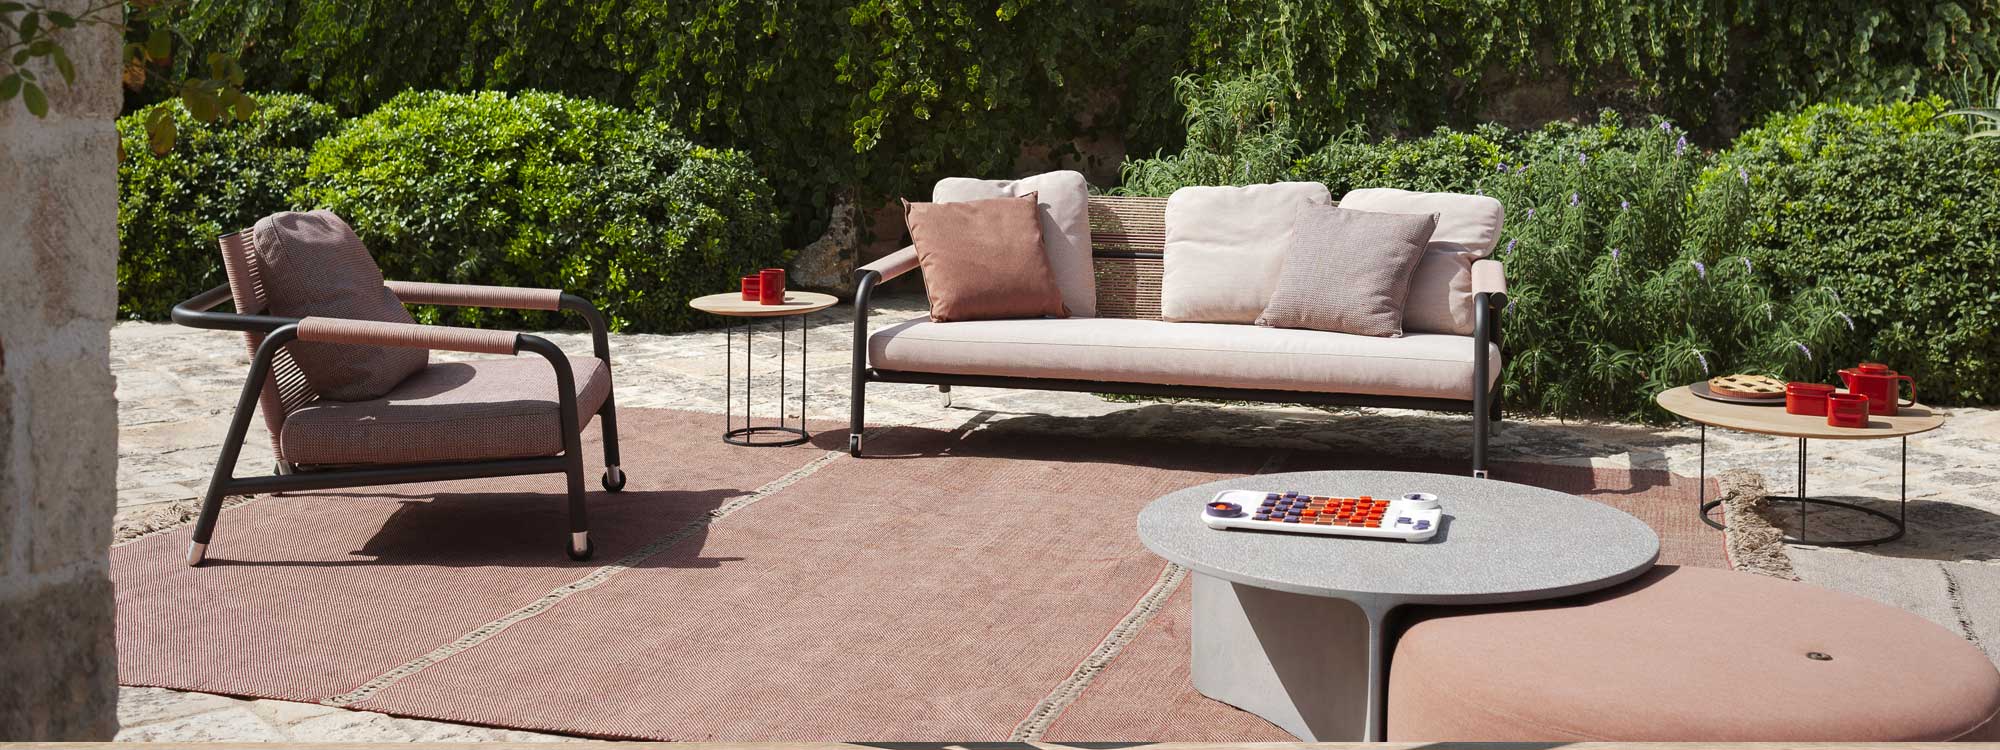 Image of Astra reclining garden sofa and lounge chair, together with Aspic and Zefiro low tables by RODA, on sunny terrace